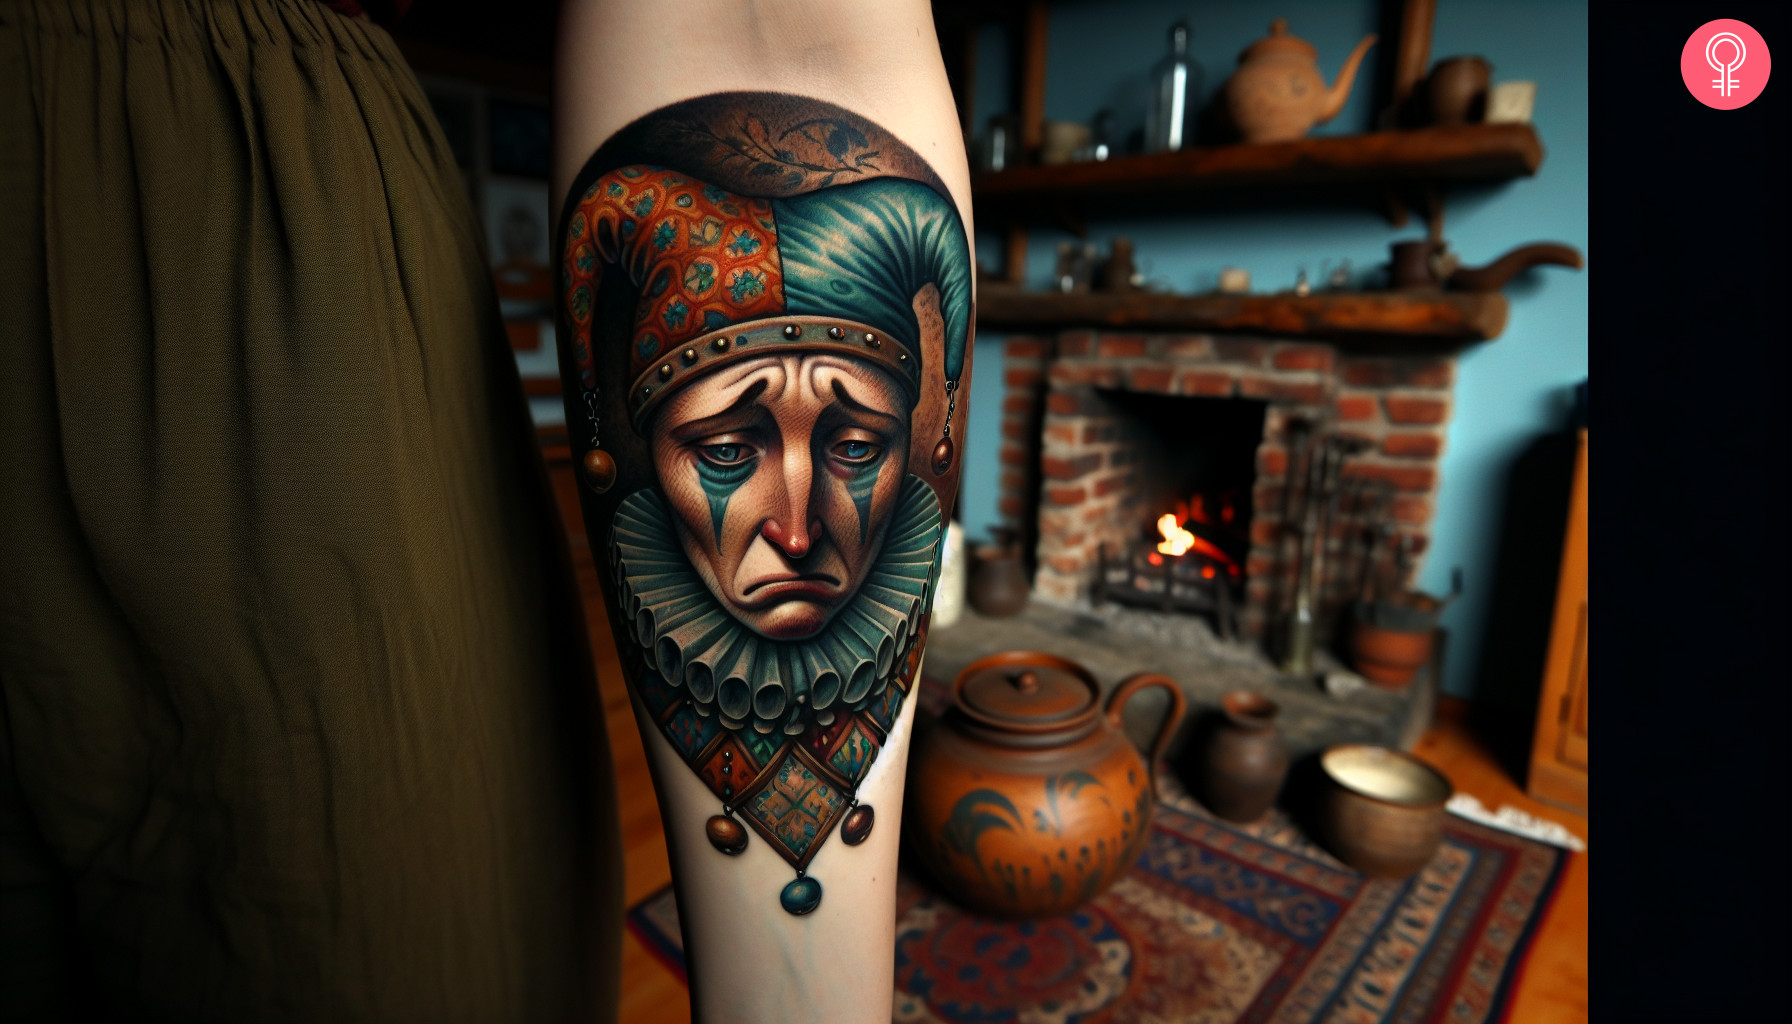 Sad jester tattoo on the forearm of a woman